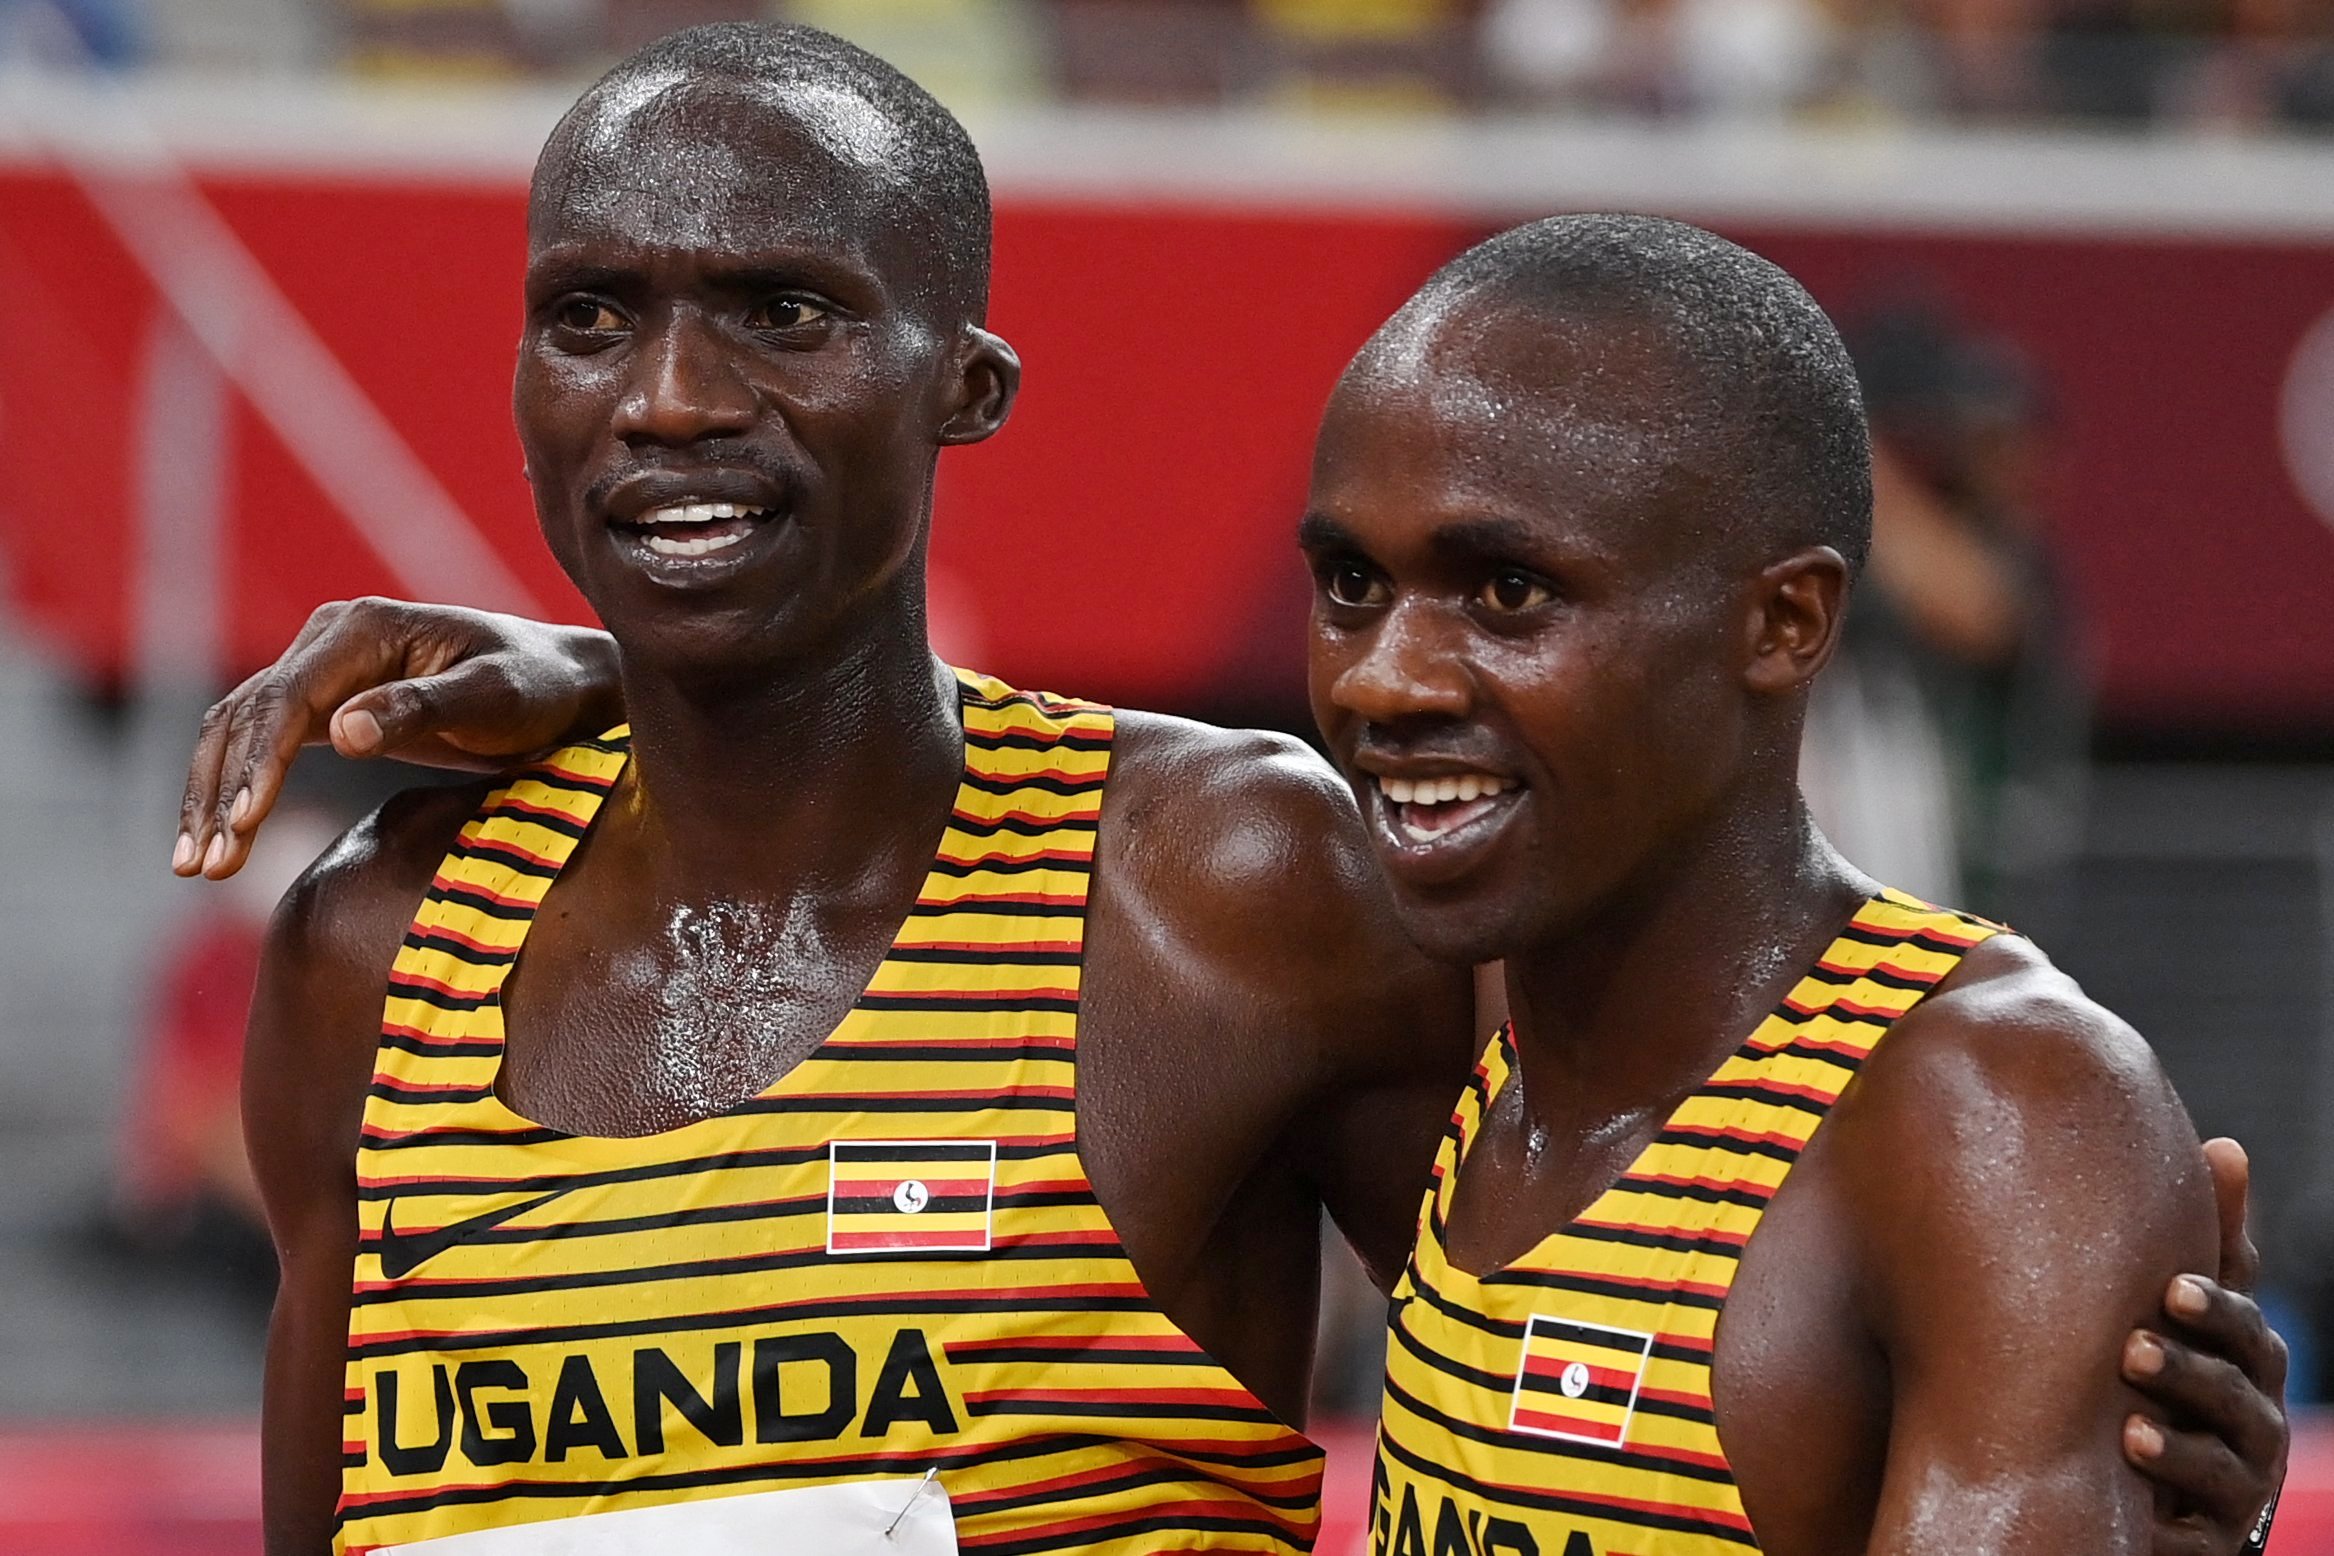 Joshua Cheptegei (L) and Jacob Kiplimo (R) embrace after finishing second and third respectively in the men's 10000m final of the Tokyo 2020 Olympic Games, 30th July 2021. Photo: AFP